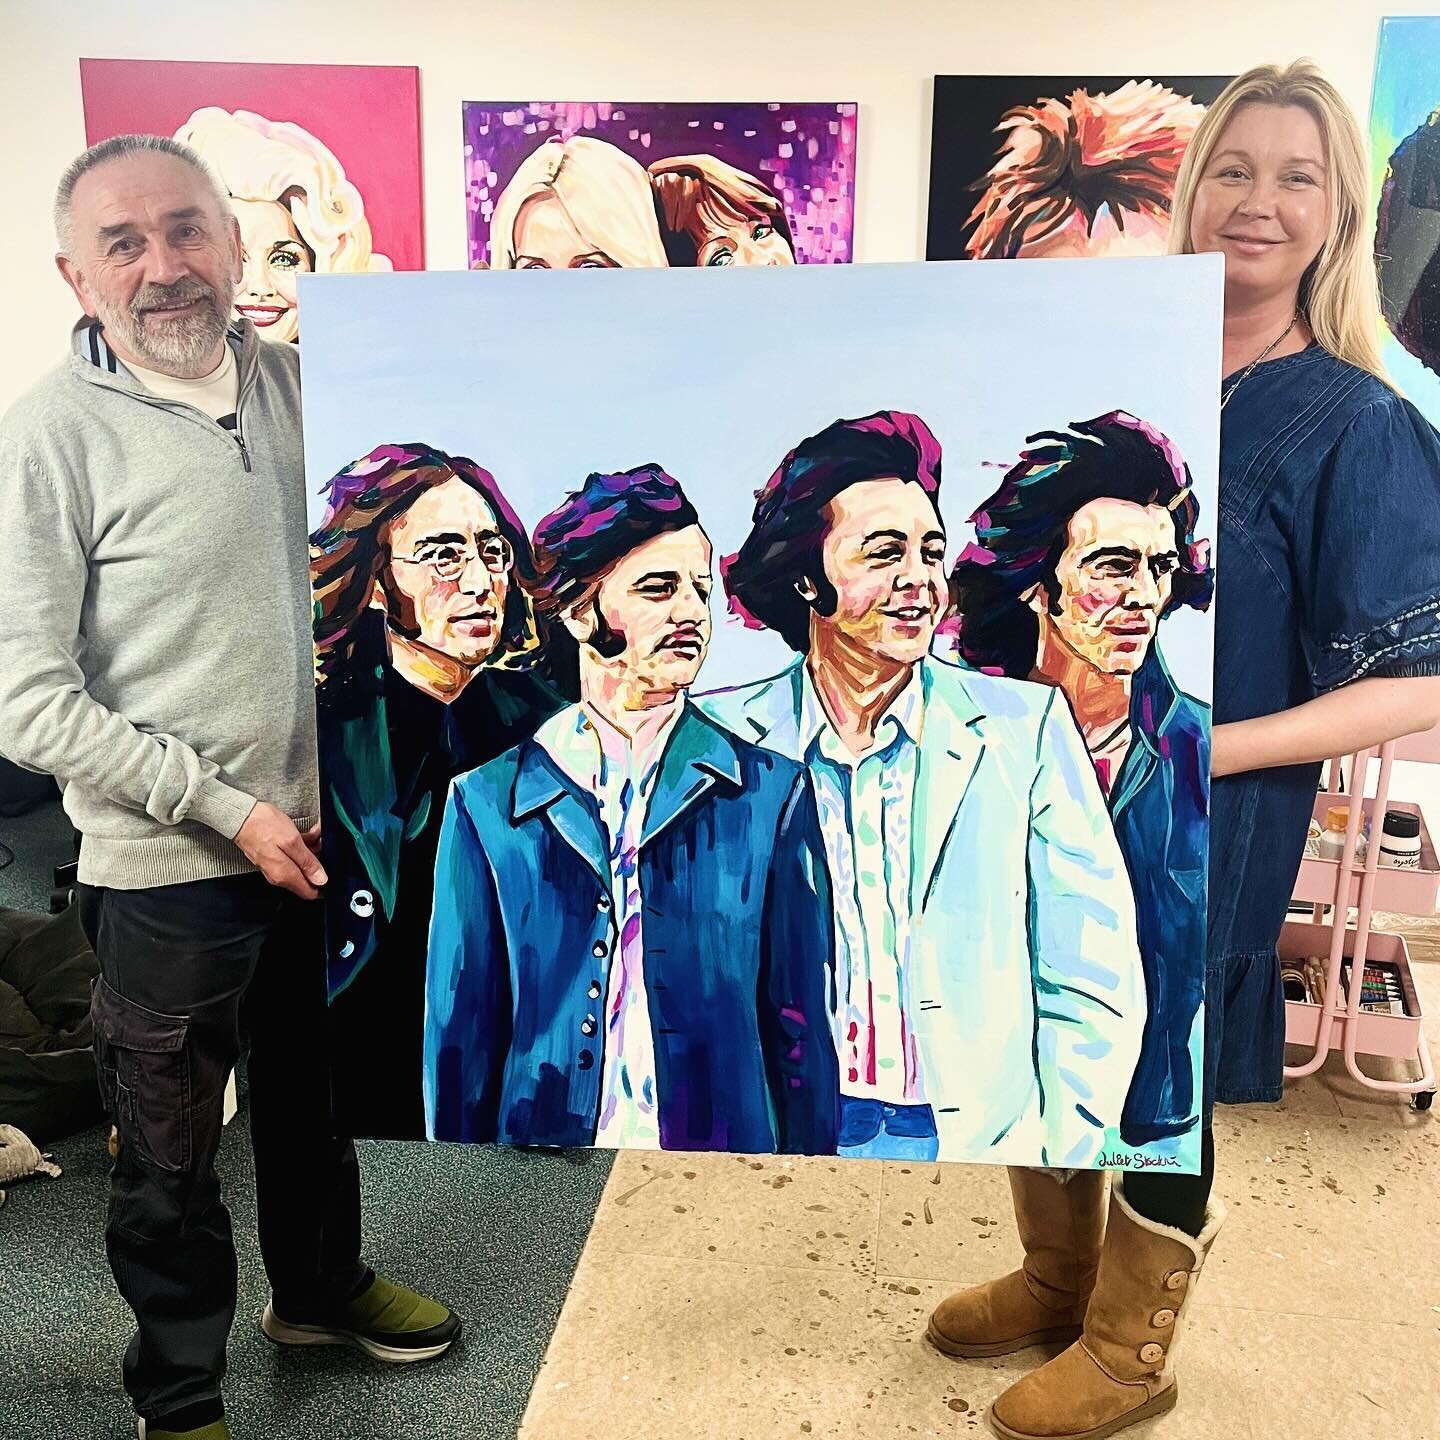 The Fab Four 🎸 my Beatles painting, has gone to its perfect forever home today 🏠 with my lovely collector Andrew, who came to my studio @start_yard this afternoon to pick it up with his son.  It was really great to catch up over a coffee @me_nu_caf